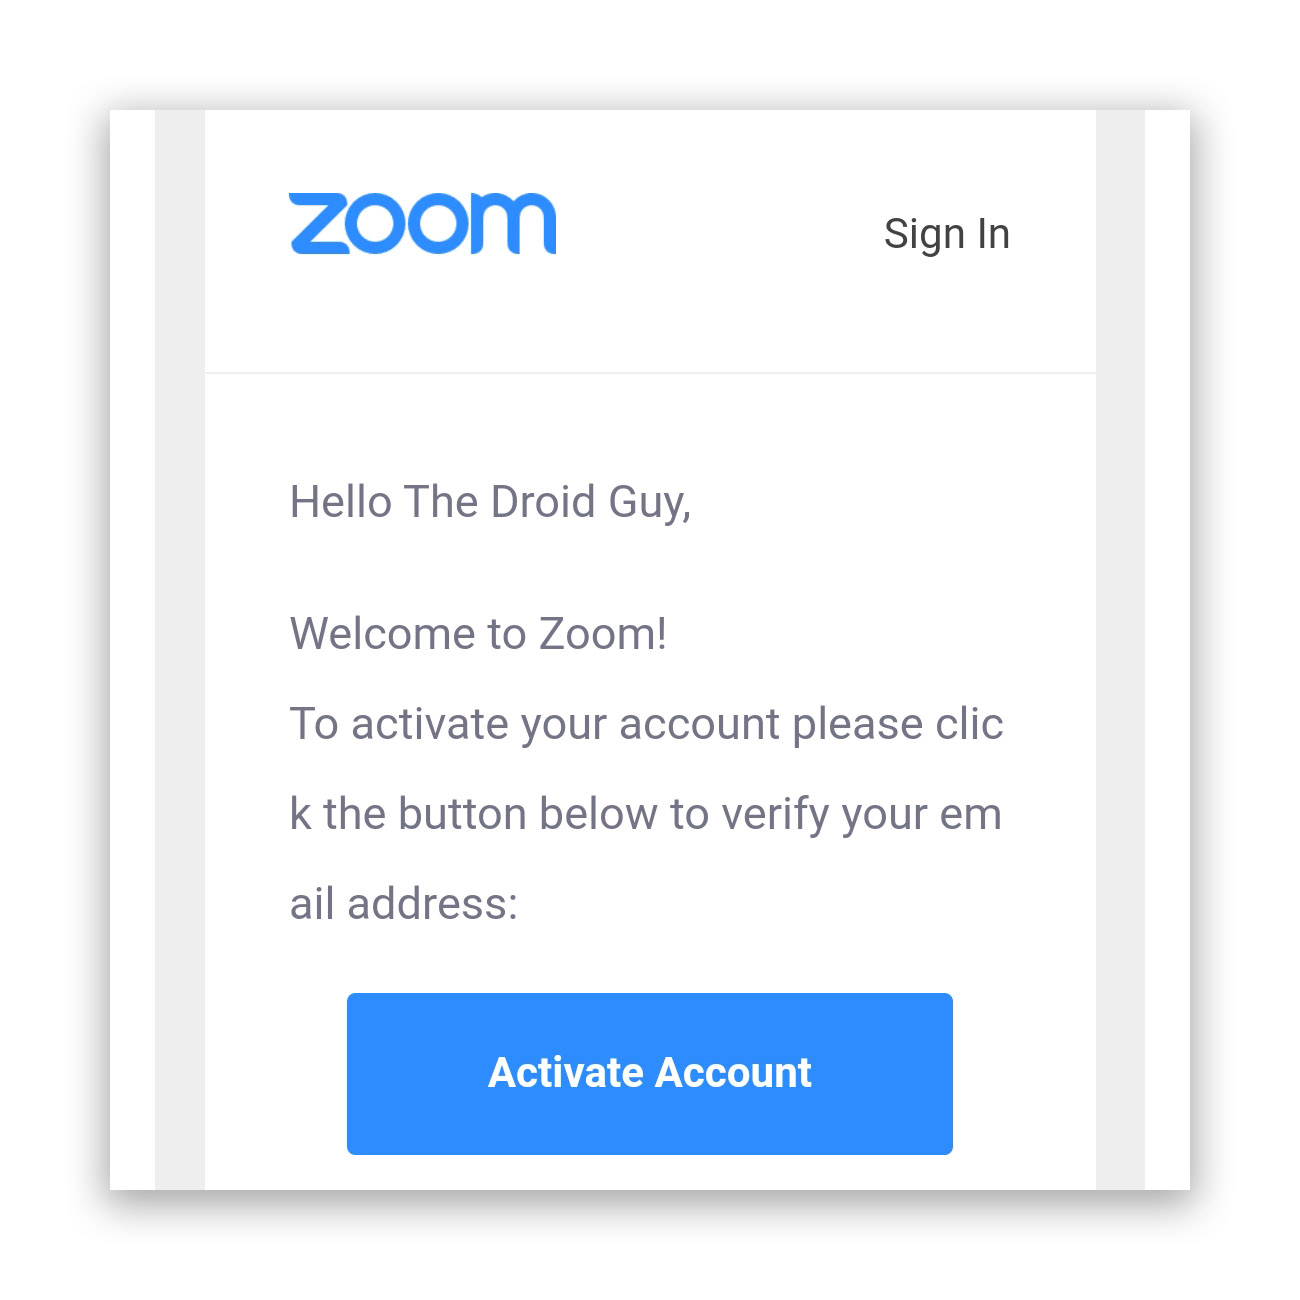 What To Do If You Can’t Receive Zoom Activation Email – The Droid Guy